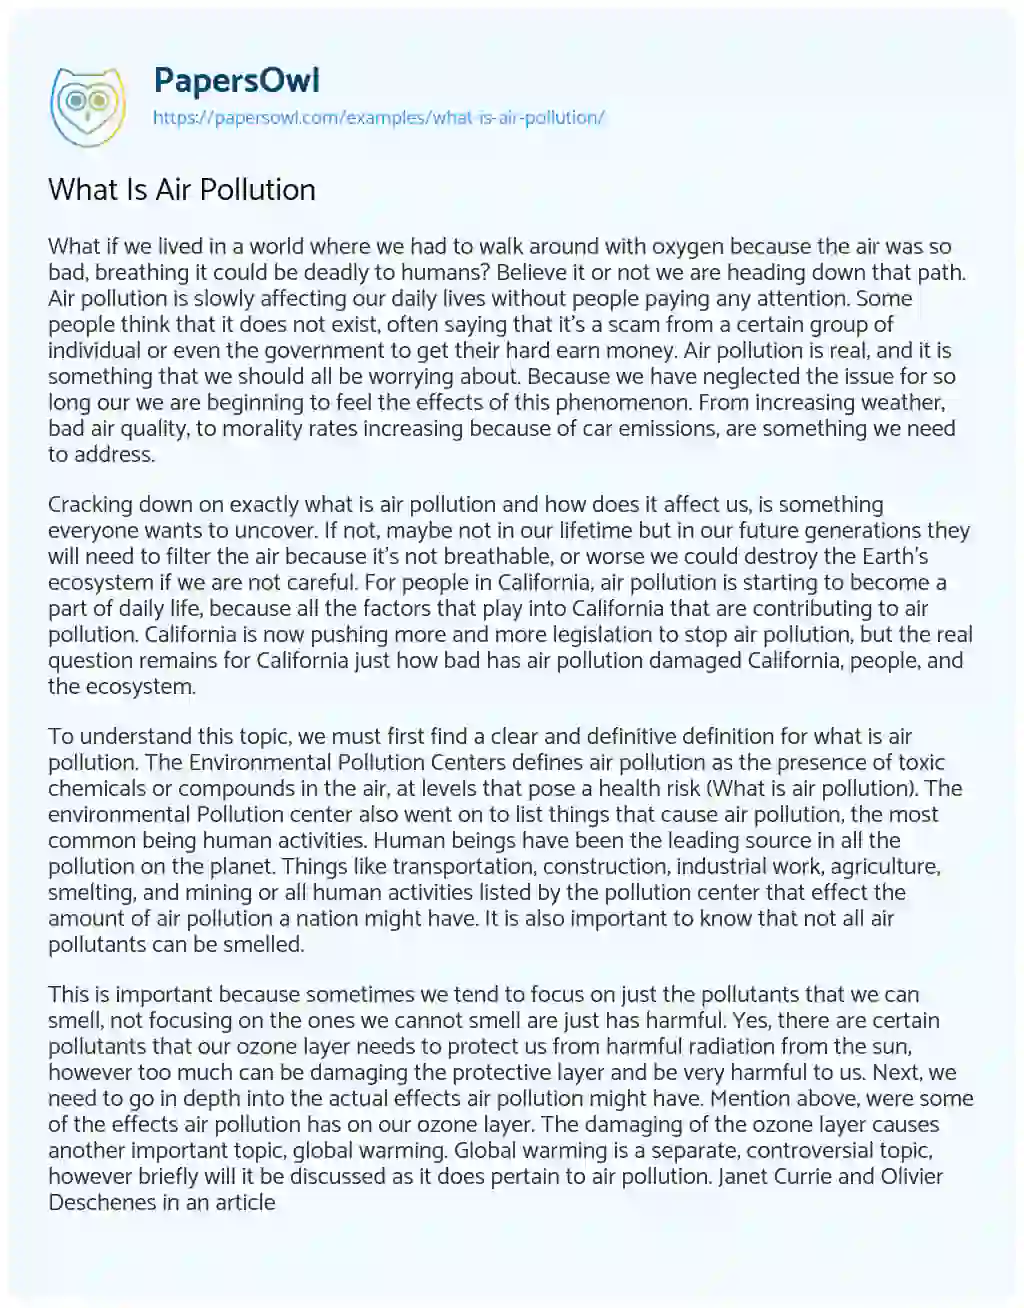 Essay on What is Air Pollution